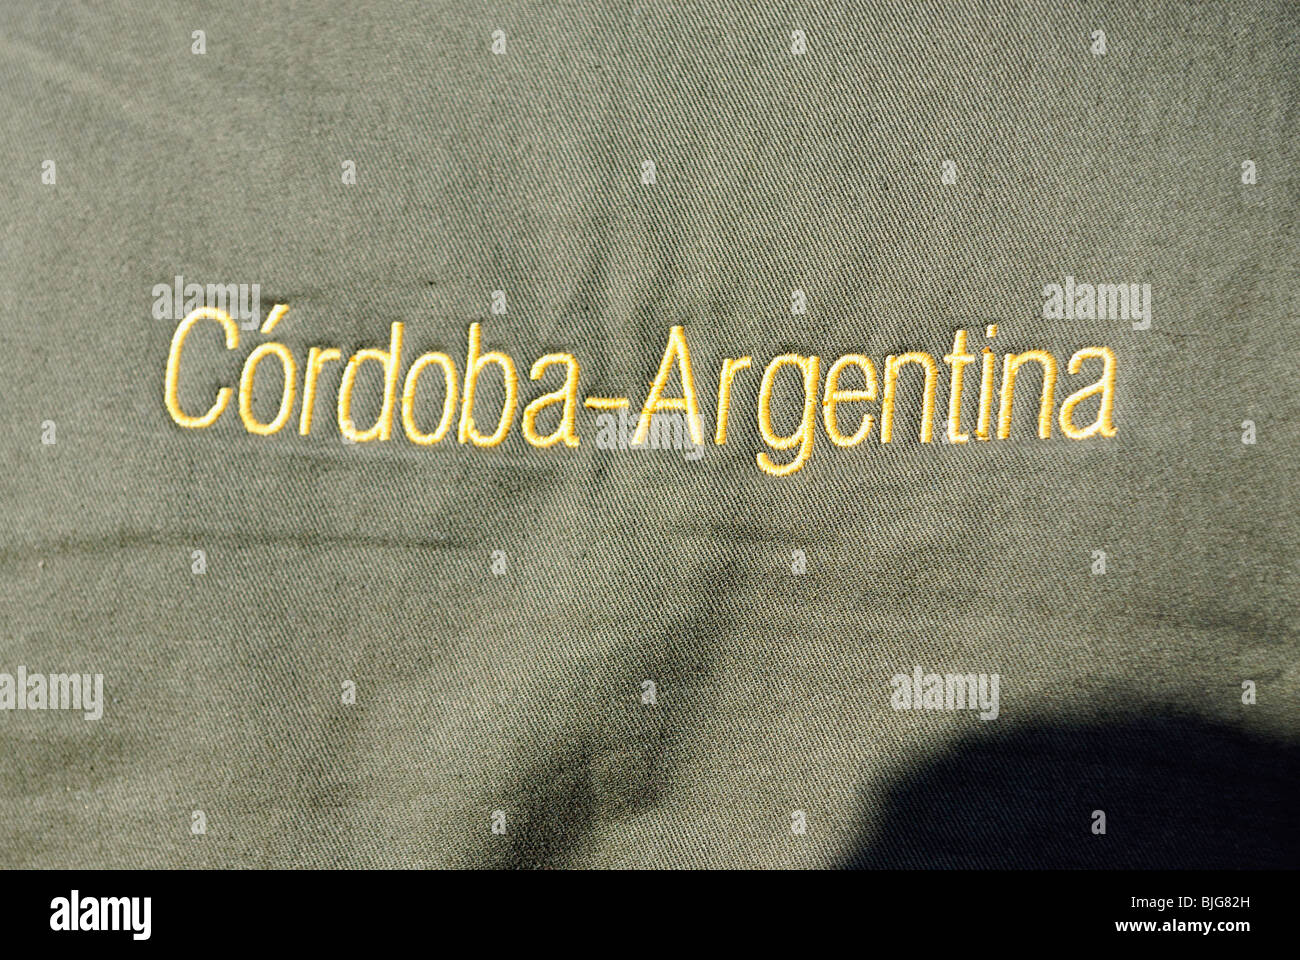 The Words Cordoba, Argentina Embroidered in Gold Thread on Olive Green Material at La Dormida, Lodge in Cordoba, Argentina Stock Photo